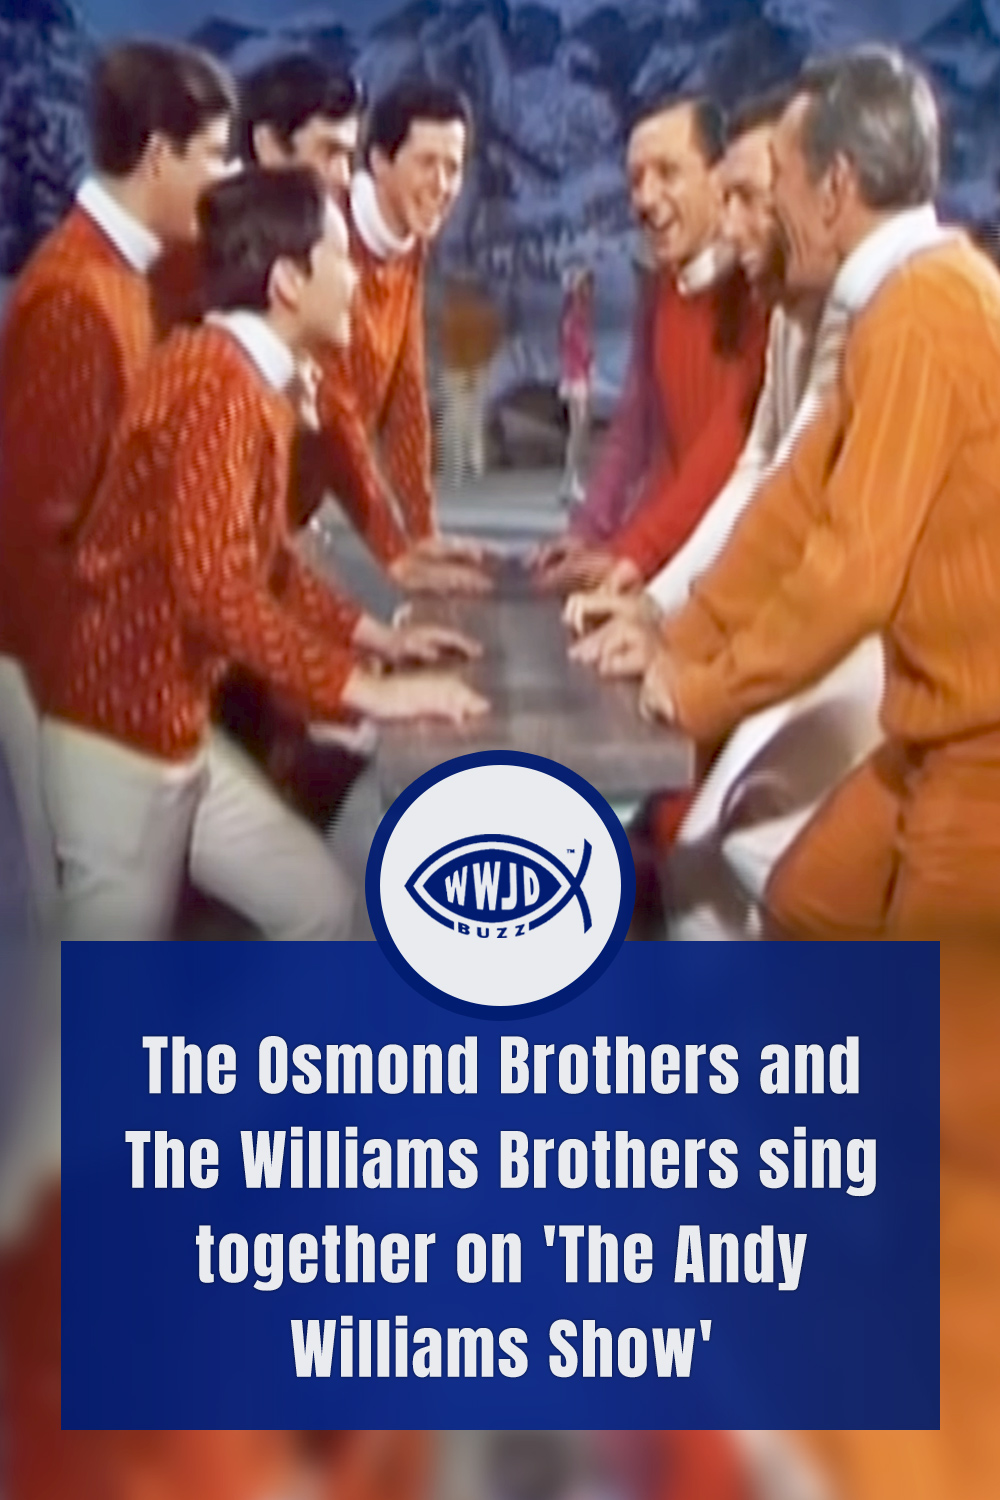 The Osmond Brothers and The Williams Brothers sing together on \'The Andy Williams Show\'